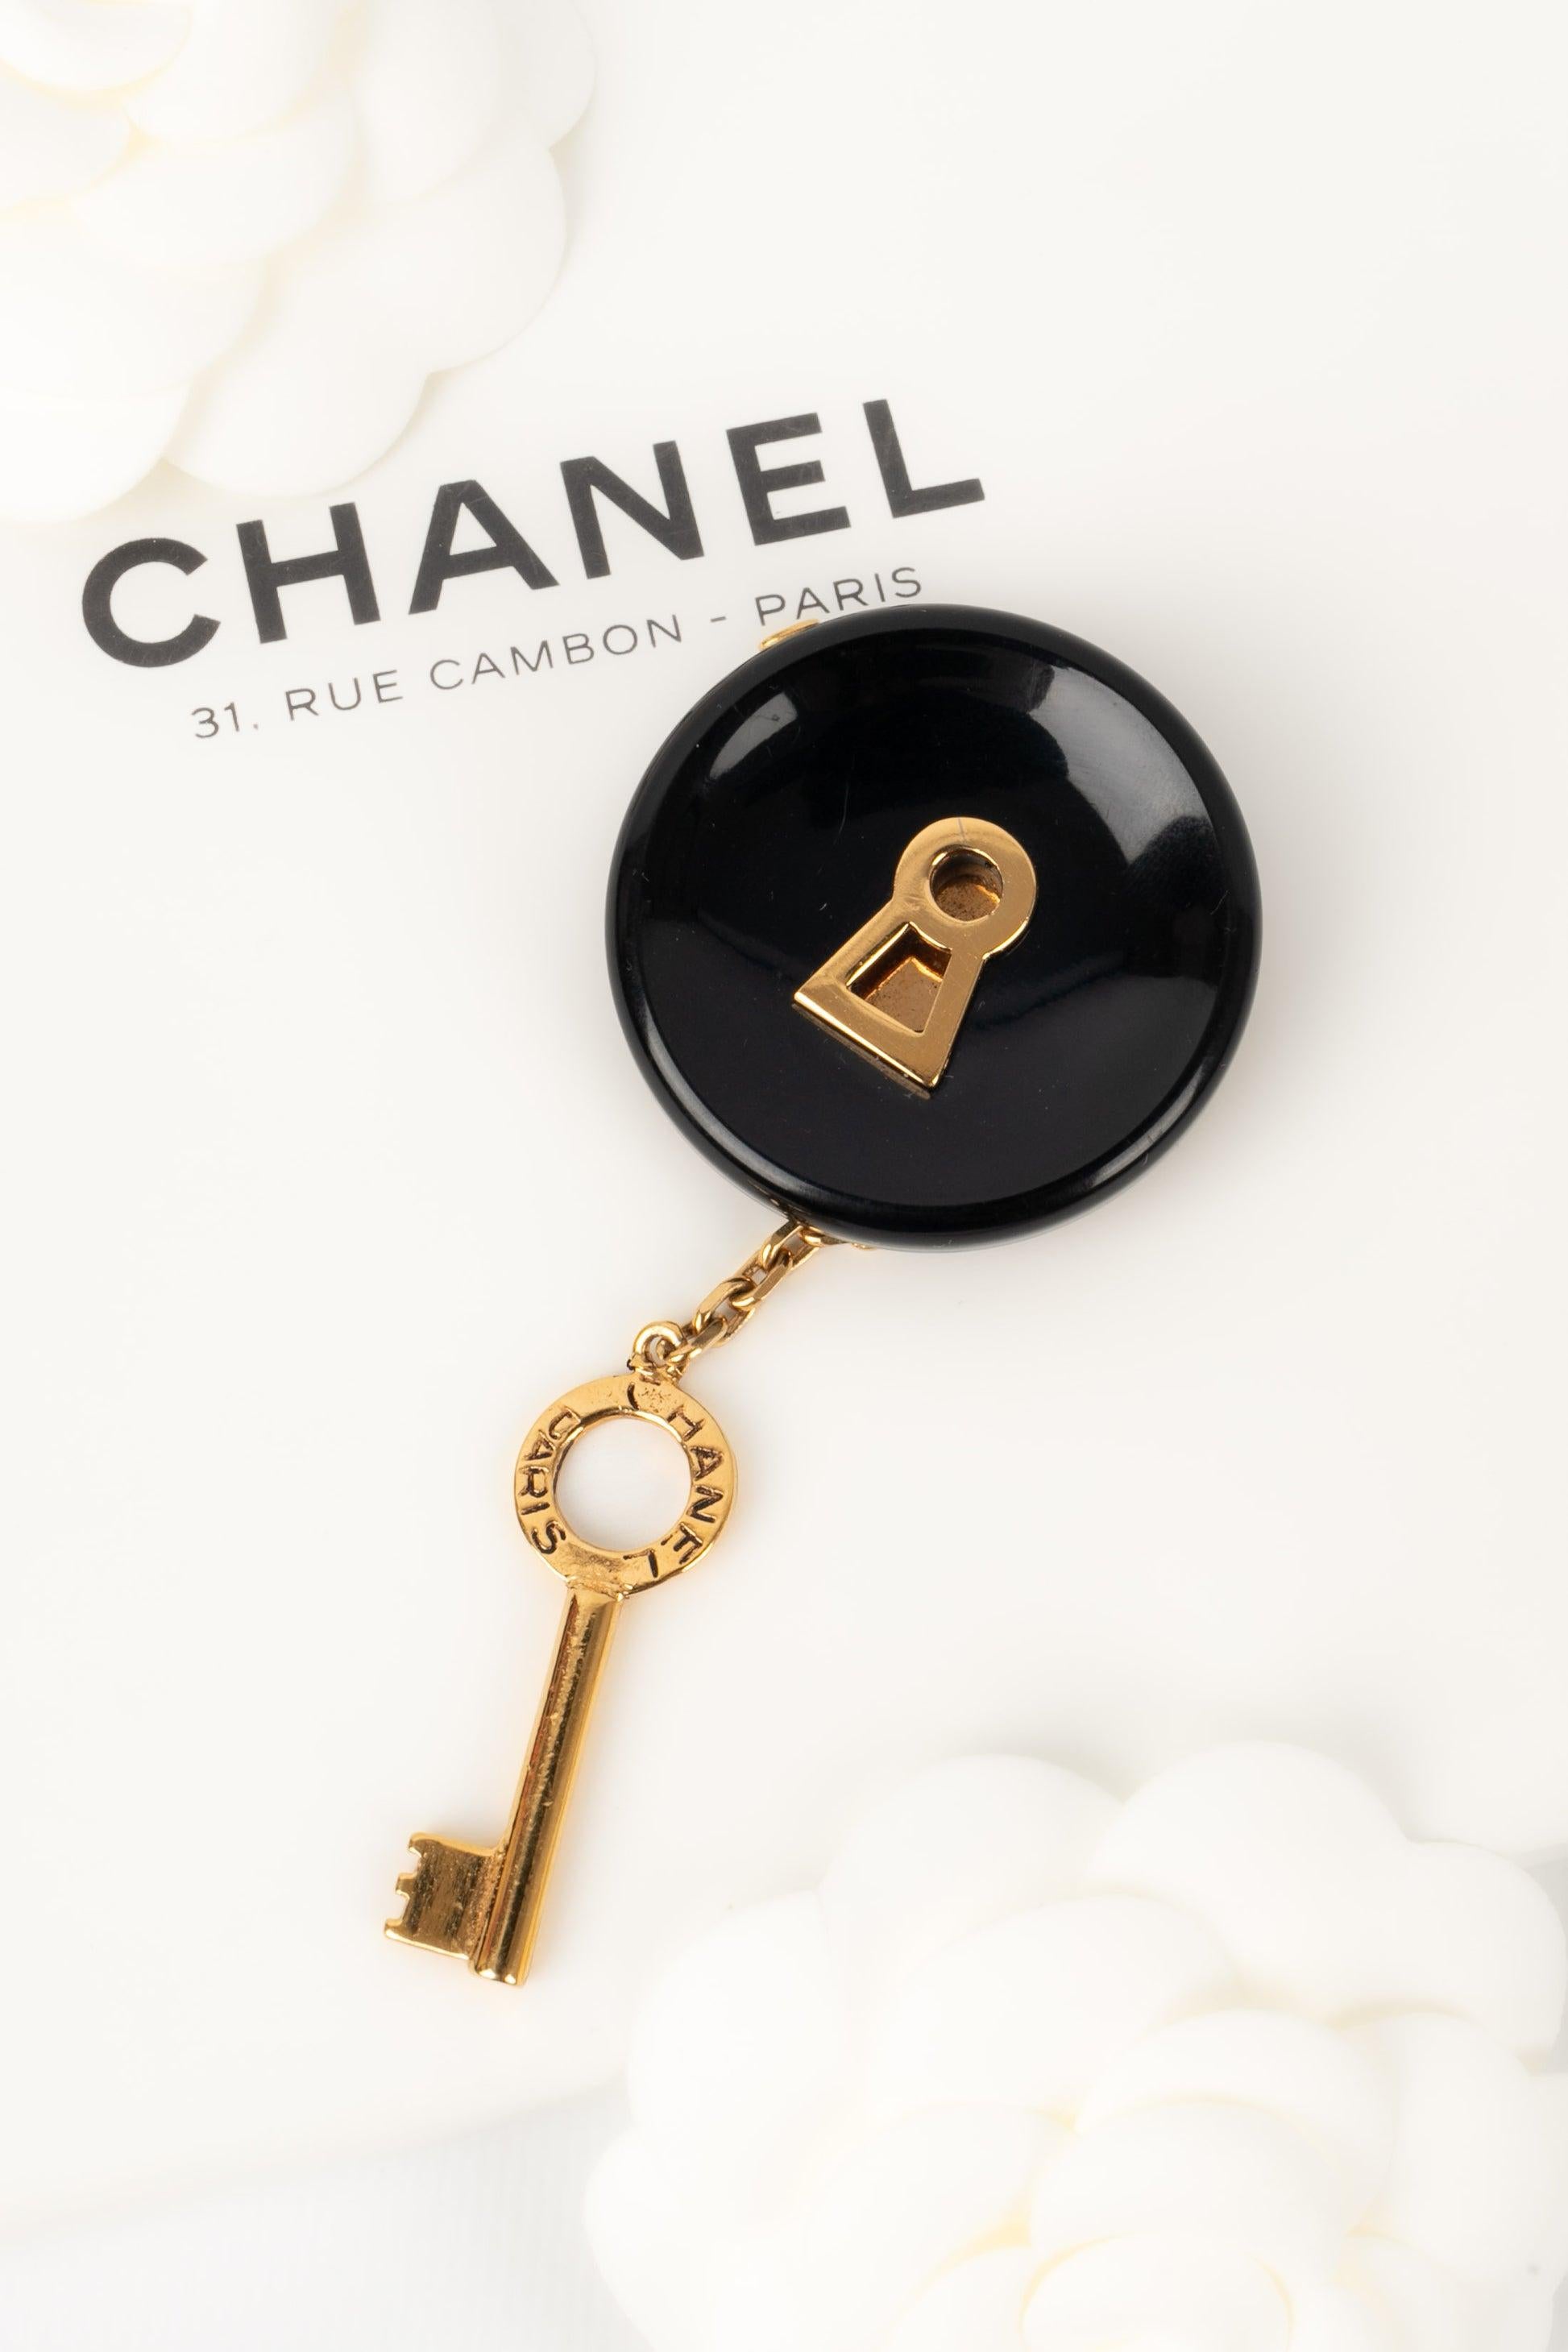 Chanel - (Made in France) Black bakelite and golden metal brooch. Fall-Winter 1999 Collection.

Additional information:
Condition: Very good condition
Dimensions: Height: 10 cm - Width: 4.5 cm

Seller Reference: BRB135
